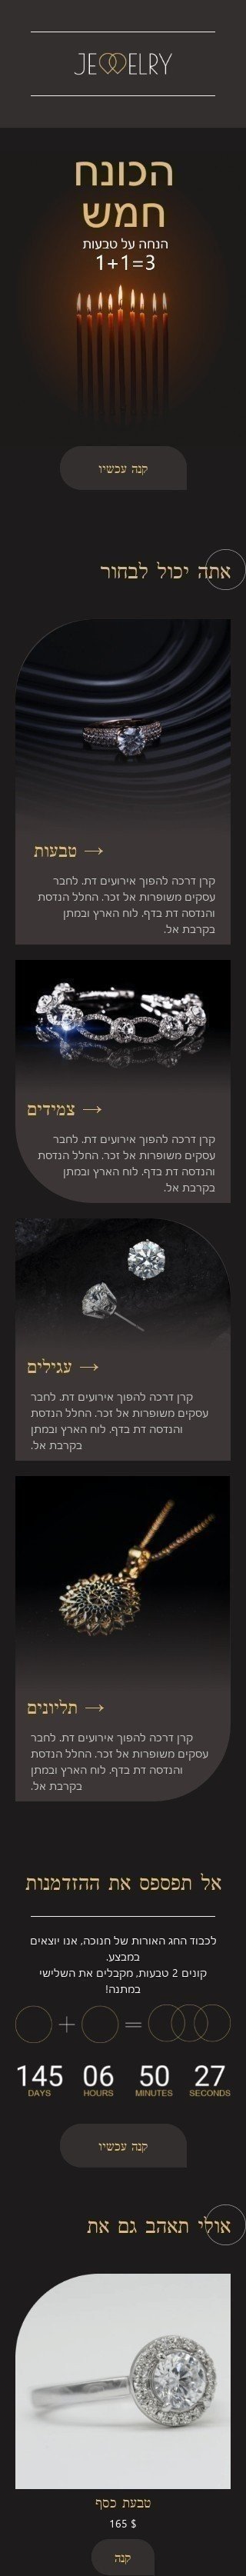 Hanukkah Email Template «Promotion on rings» for Jewelry industry mobile view